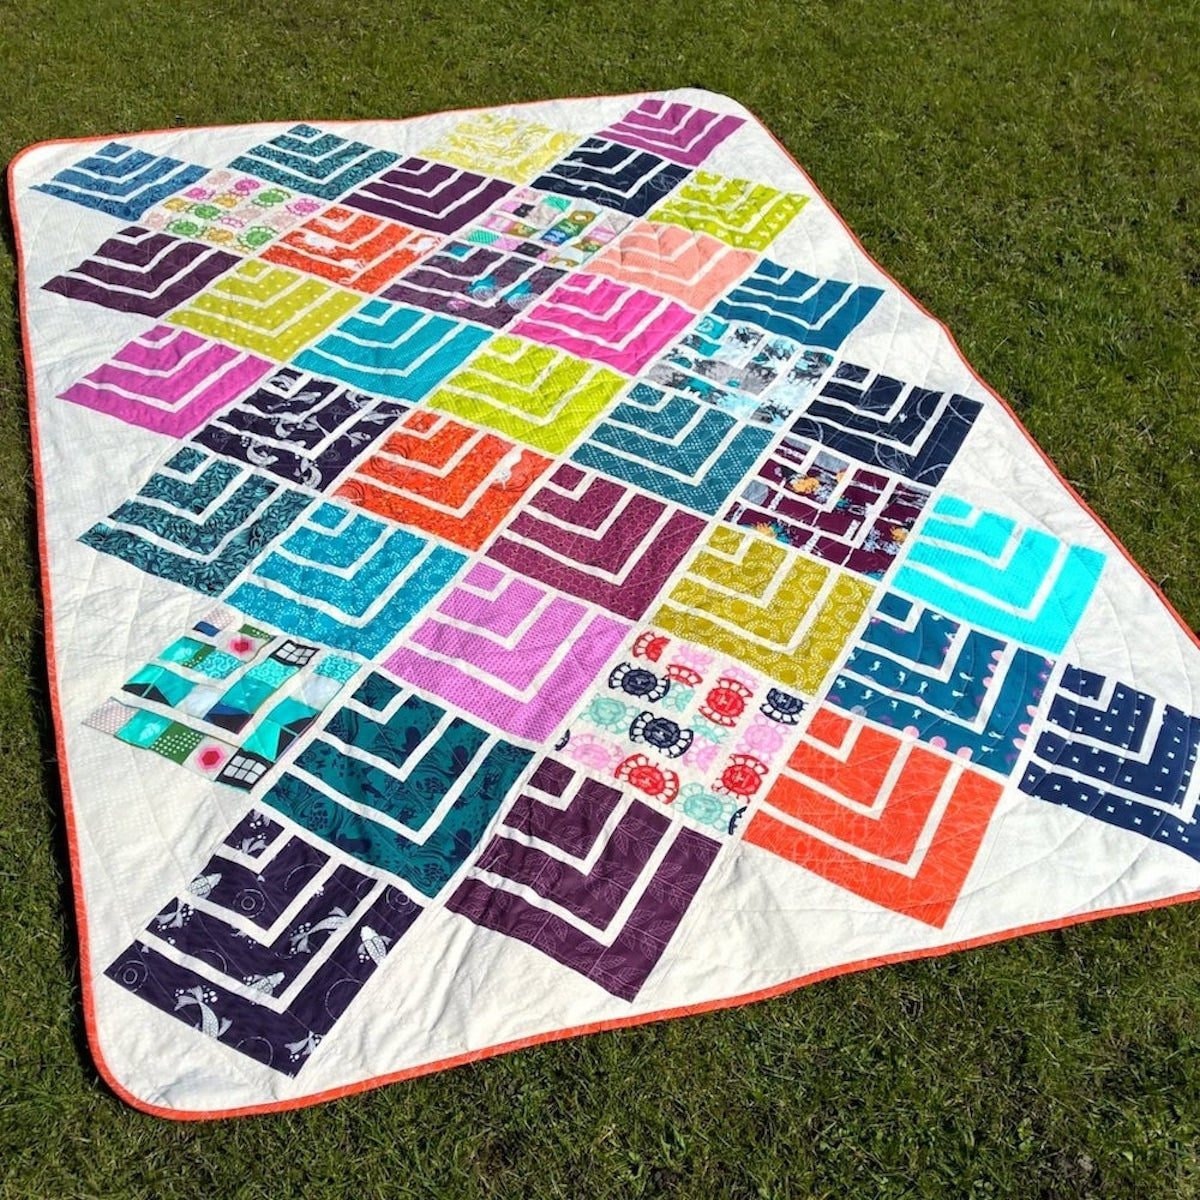 A beginner-friendly quilt pattern from Etsy